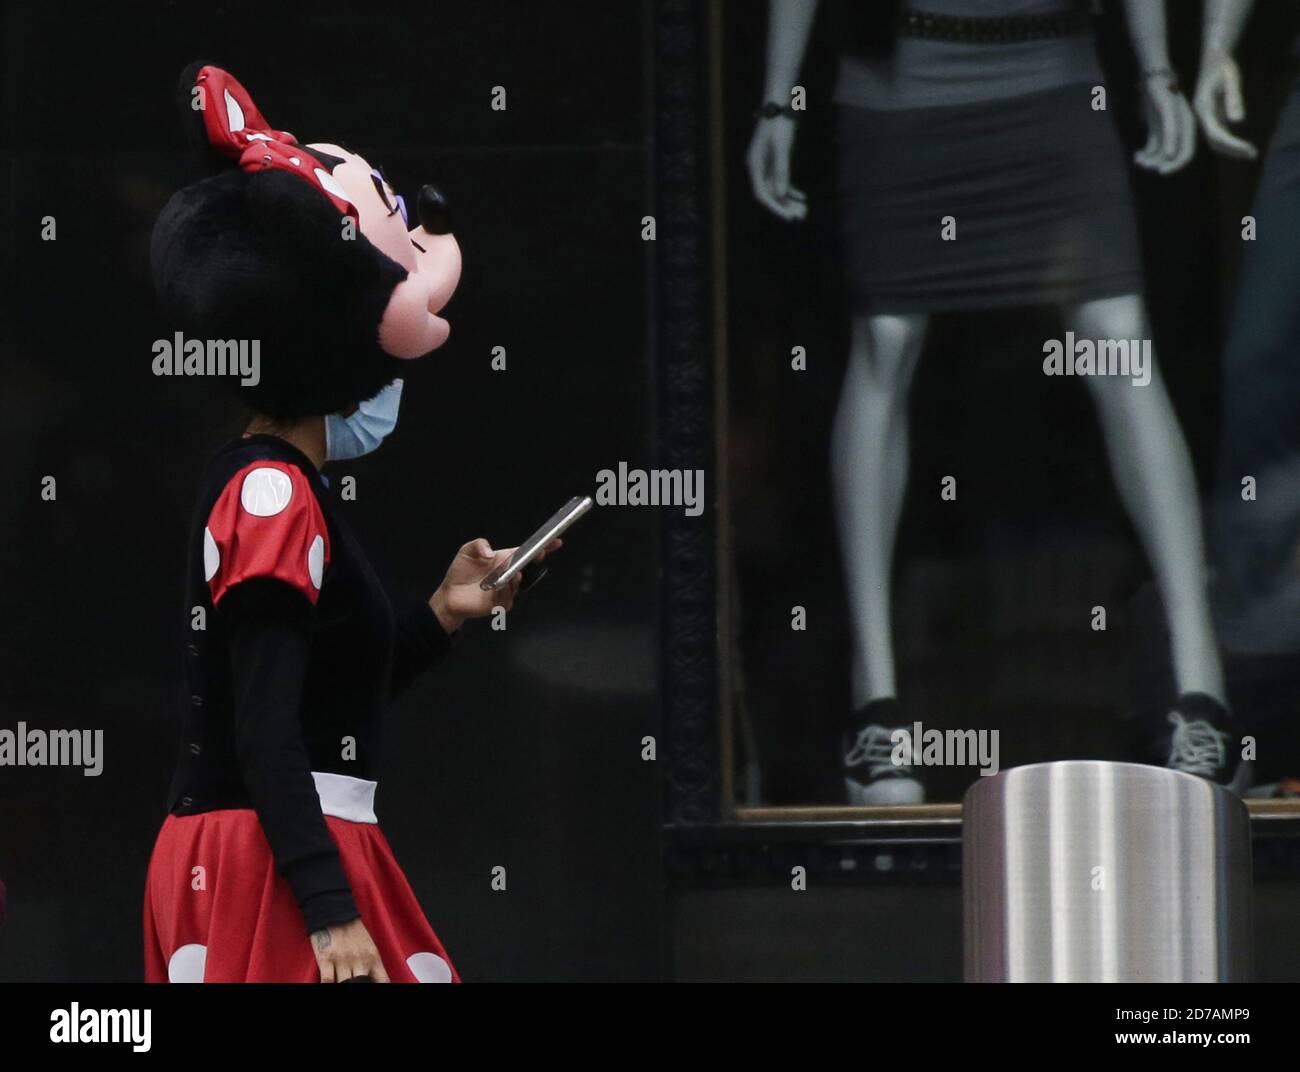 New York, USA. 21st Oct 2020. New York, United States. 21st Oct, 2020. A worker dressed as Minnie Mouse wears face masks to protect from and to prevent the spread of COVID-19 in Times Square in New York City on Wednesday, October 21, 2020. Recently, a few neighborhoods in Brooklyn and Queens have seen a slight uptick in coronavirus cases. Photo by John Angelillo/UPI Credit: UPI/Alamy Live News Credit: UPI/Alamy Live News Stock Photo